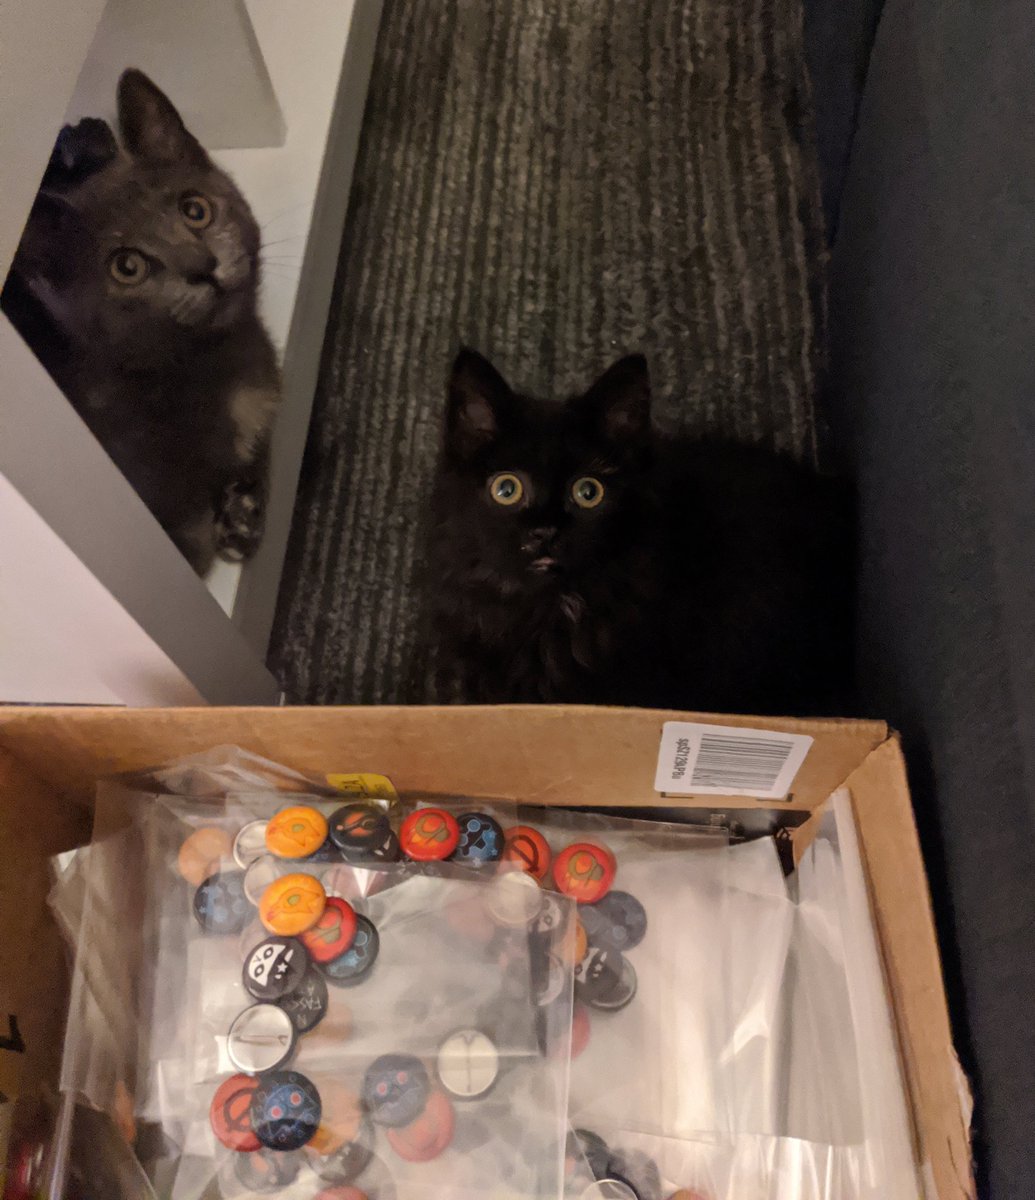 Bethany is bagging up pin packs for the NITW merch shop and helpers have arrived